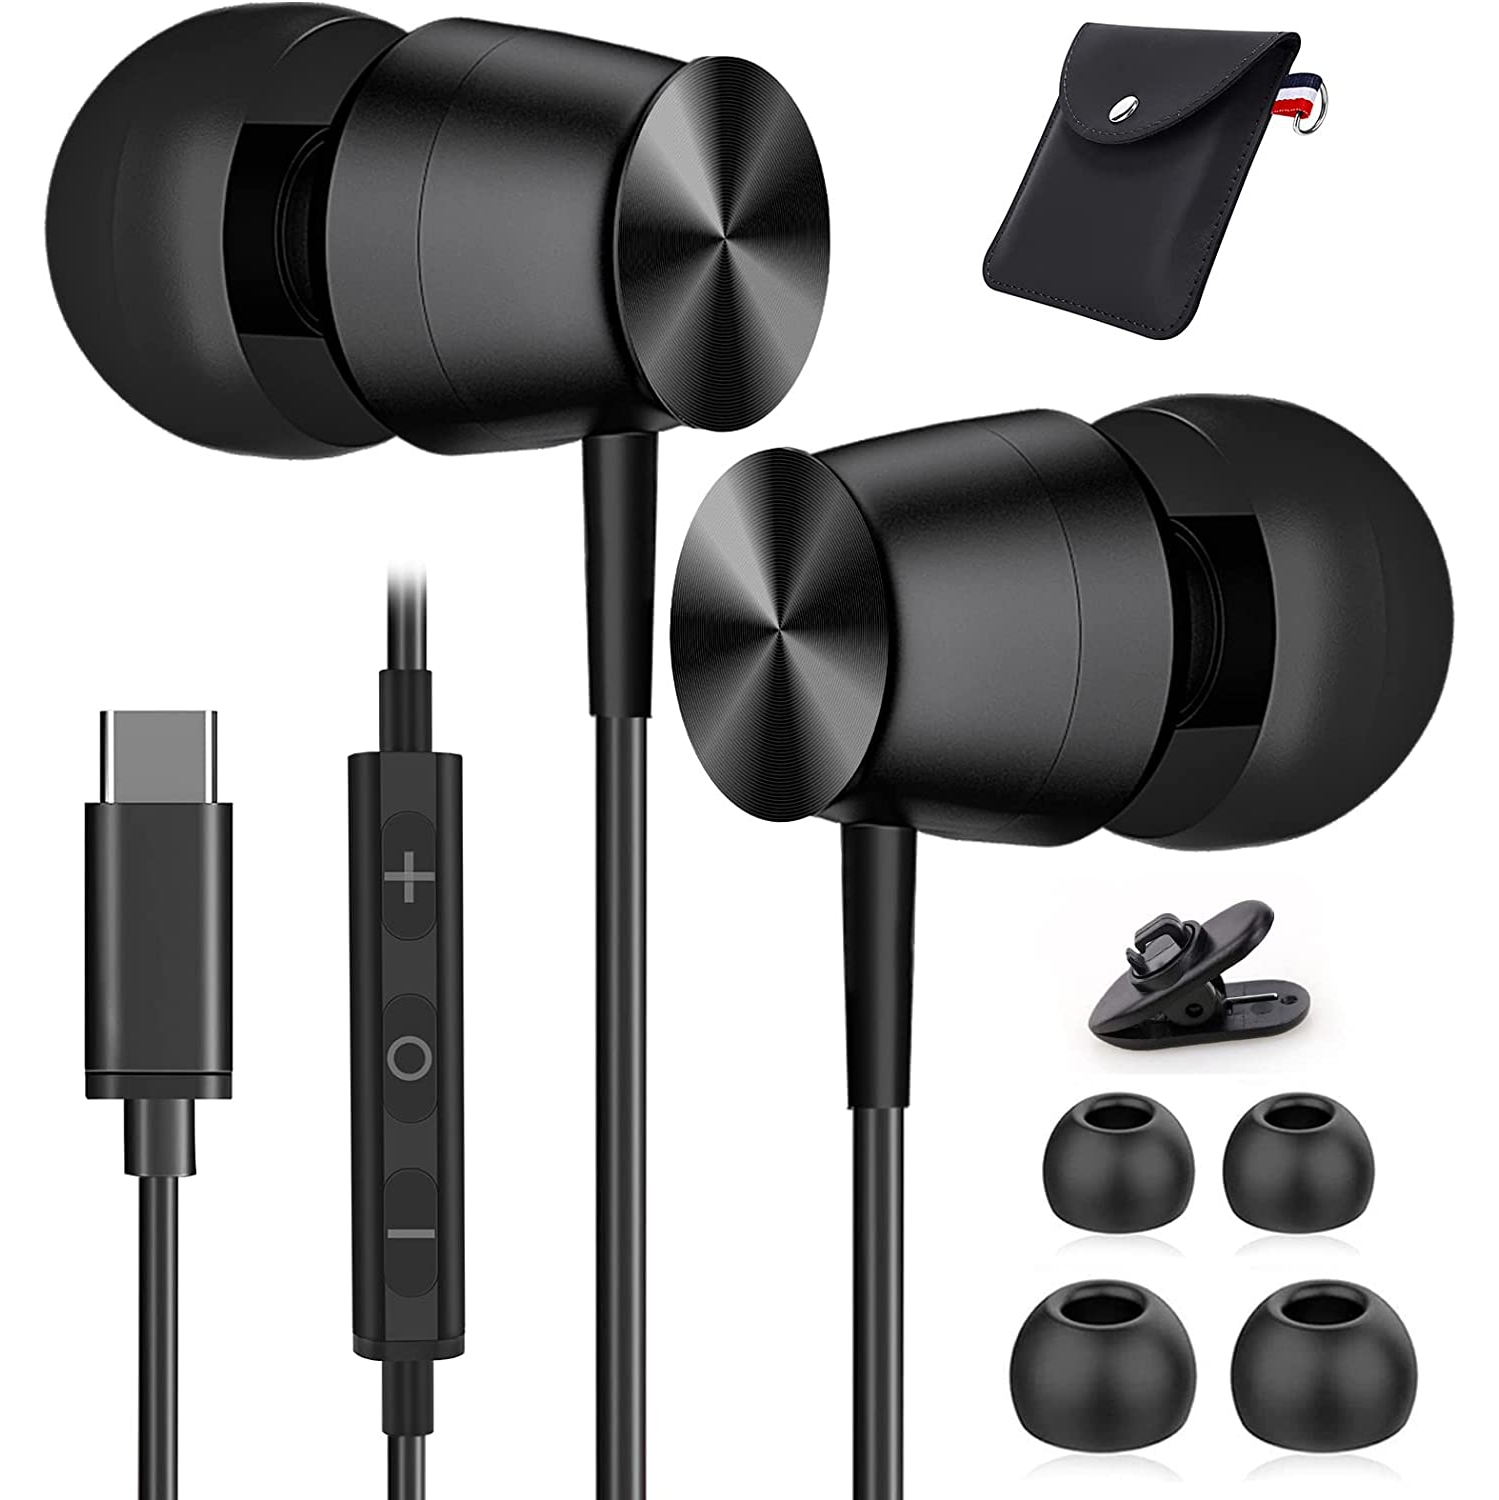 Dolaer USB C Headphones with Mic for Samsung S22/S21/S20 FE, HiFi Stereo in-Ear Type C Wired Earbuds USB-C Earphones Noise Cancelling Type C Headphone for Galaxy Z Flip 3 OnePlus